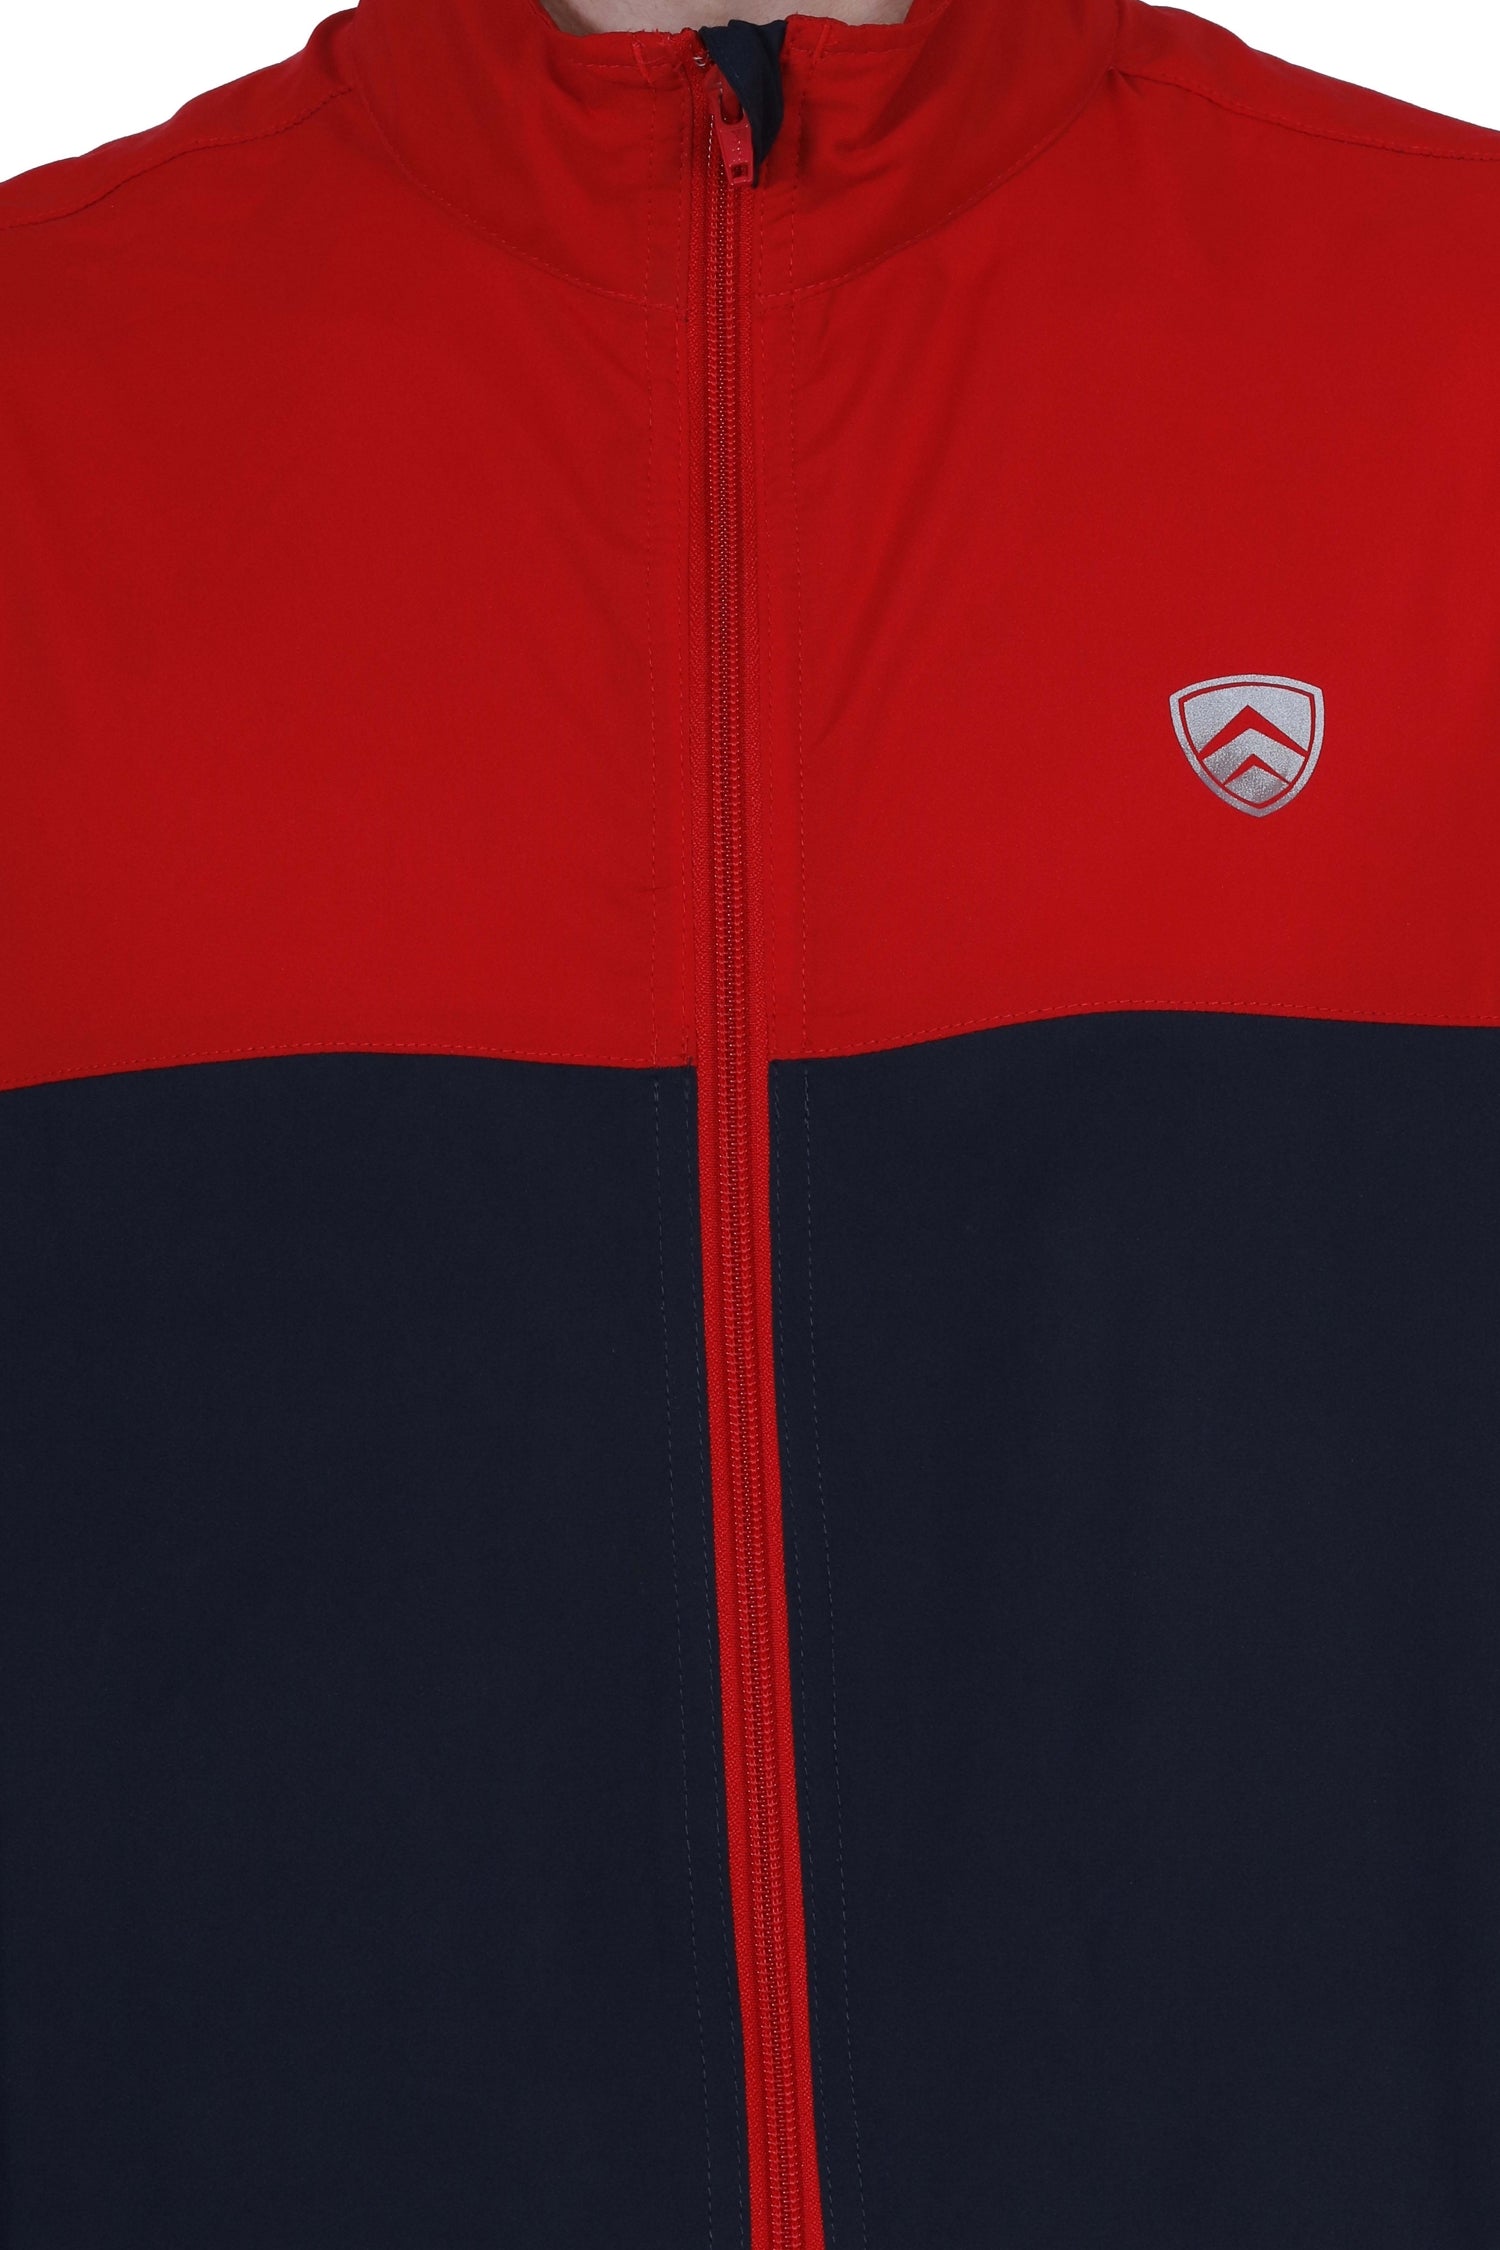 ARMR Mens Navy/Red SPORT TRAINING JACKET - Square Front